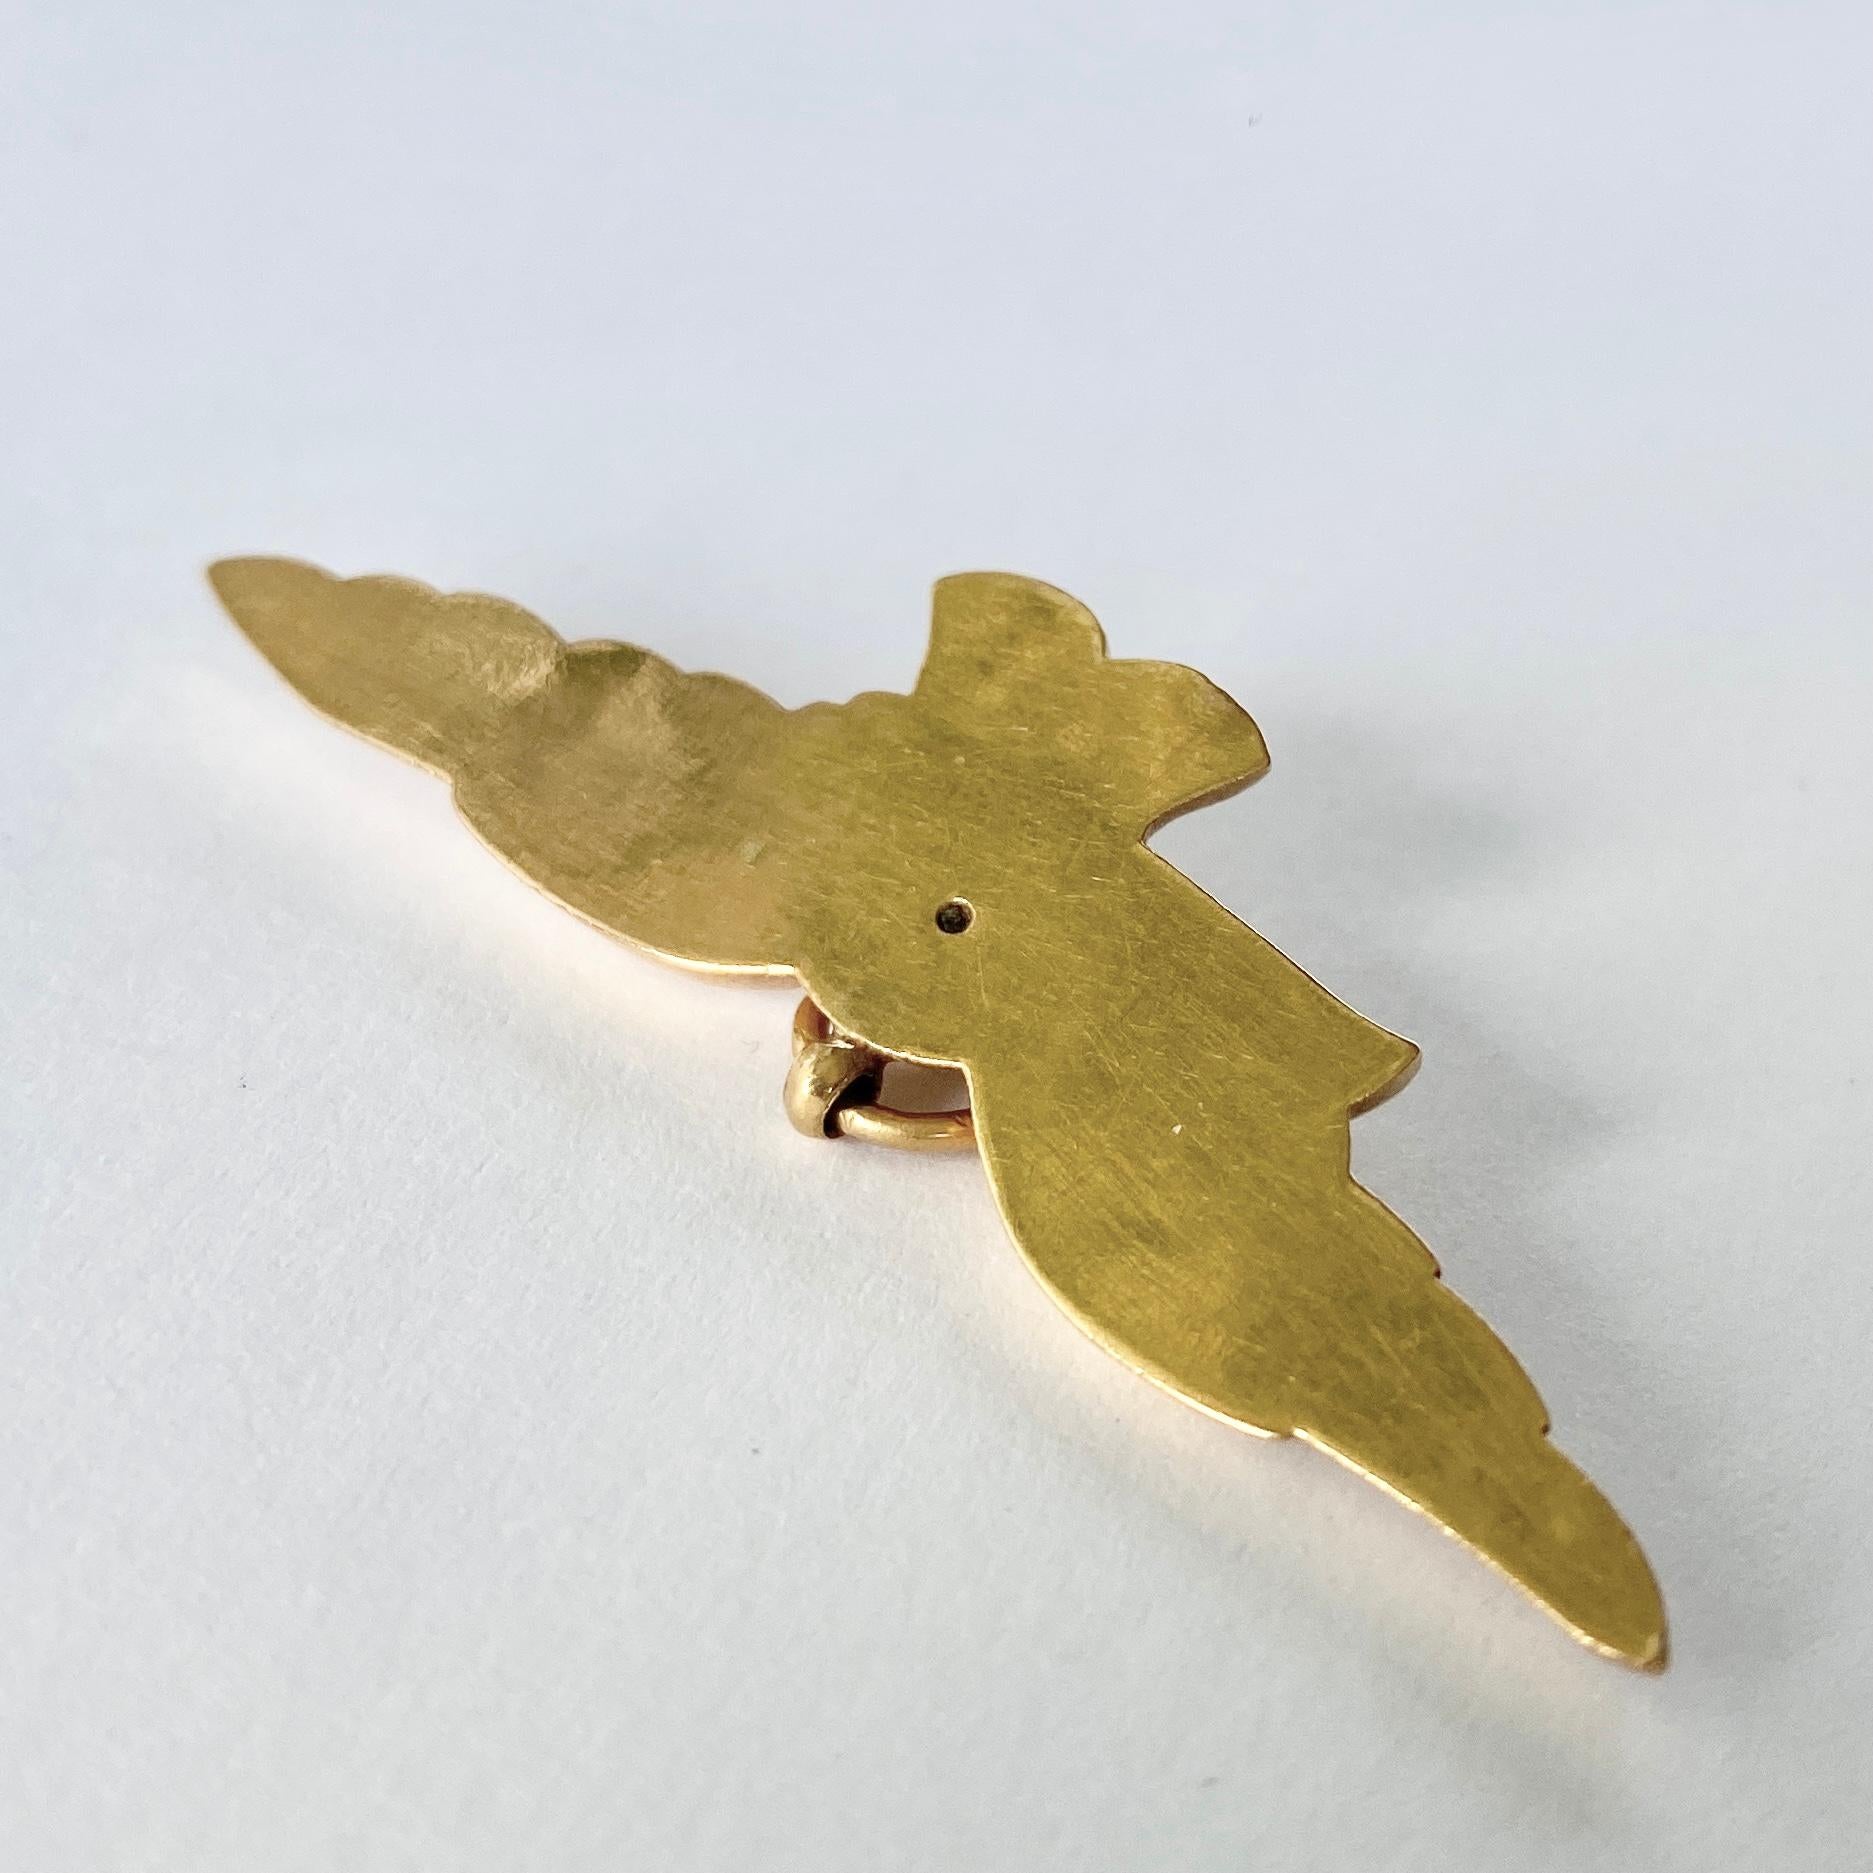 This gorgeous eagle pendant is modelled in 18 carat gold. Easgles are worn to represent Strength, Peace and Honesty. 

Wing Span: 51mm

Weight: 4.1g